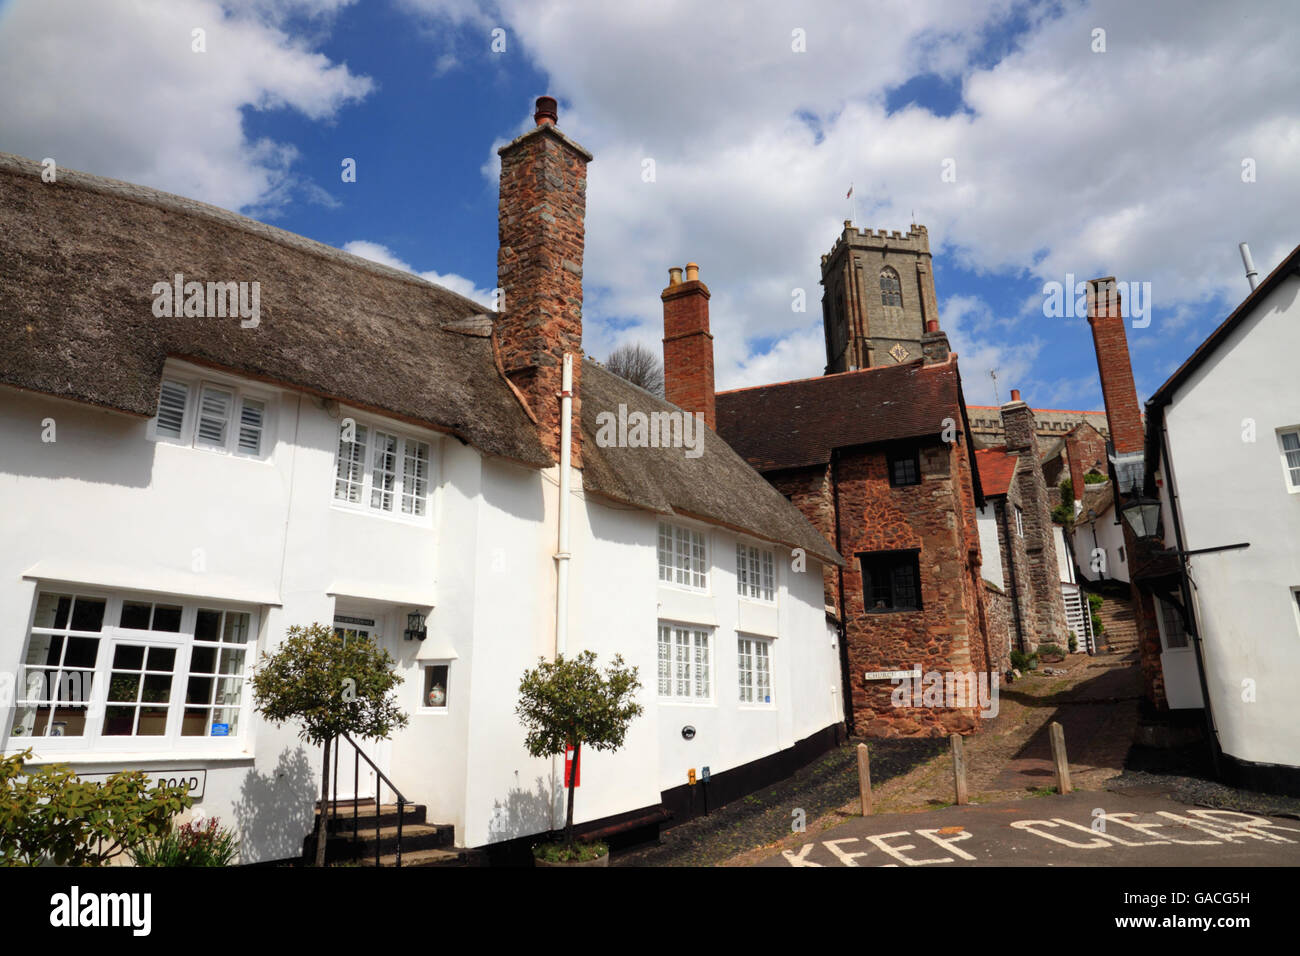 Cottages in Vicarage Road, looking towards Church Steps, Minehead, Somerset. Stock Photo